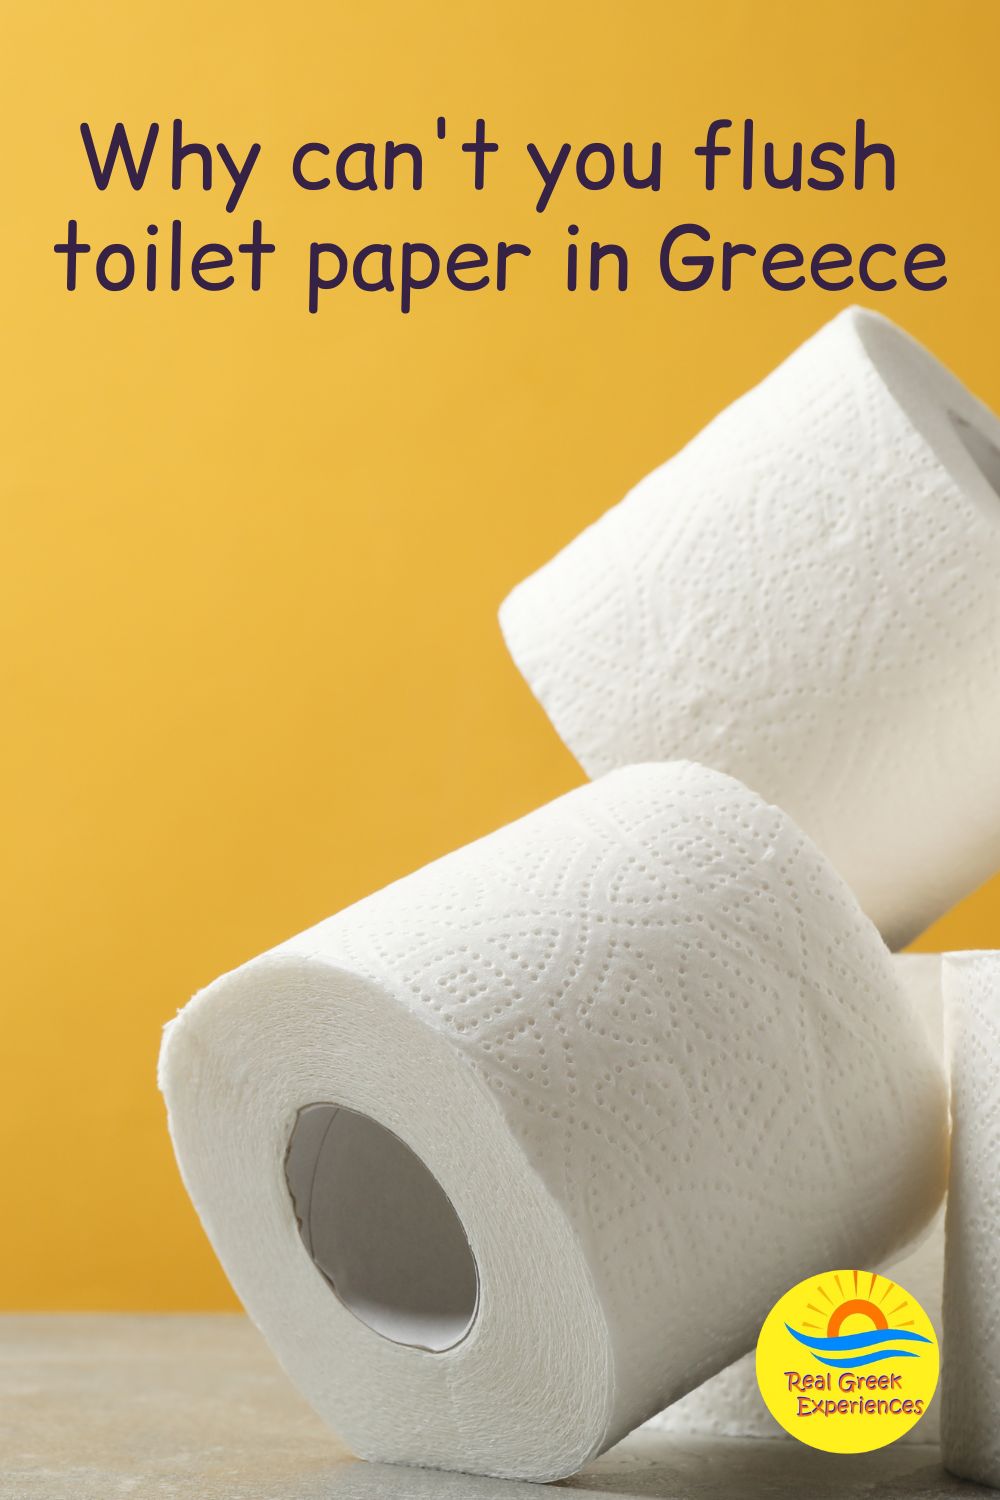 You shouldn't flush toilet paper in Greece